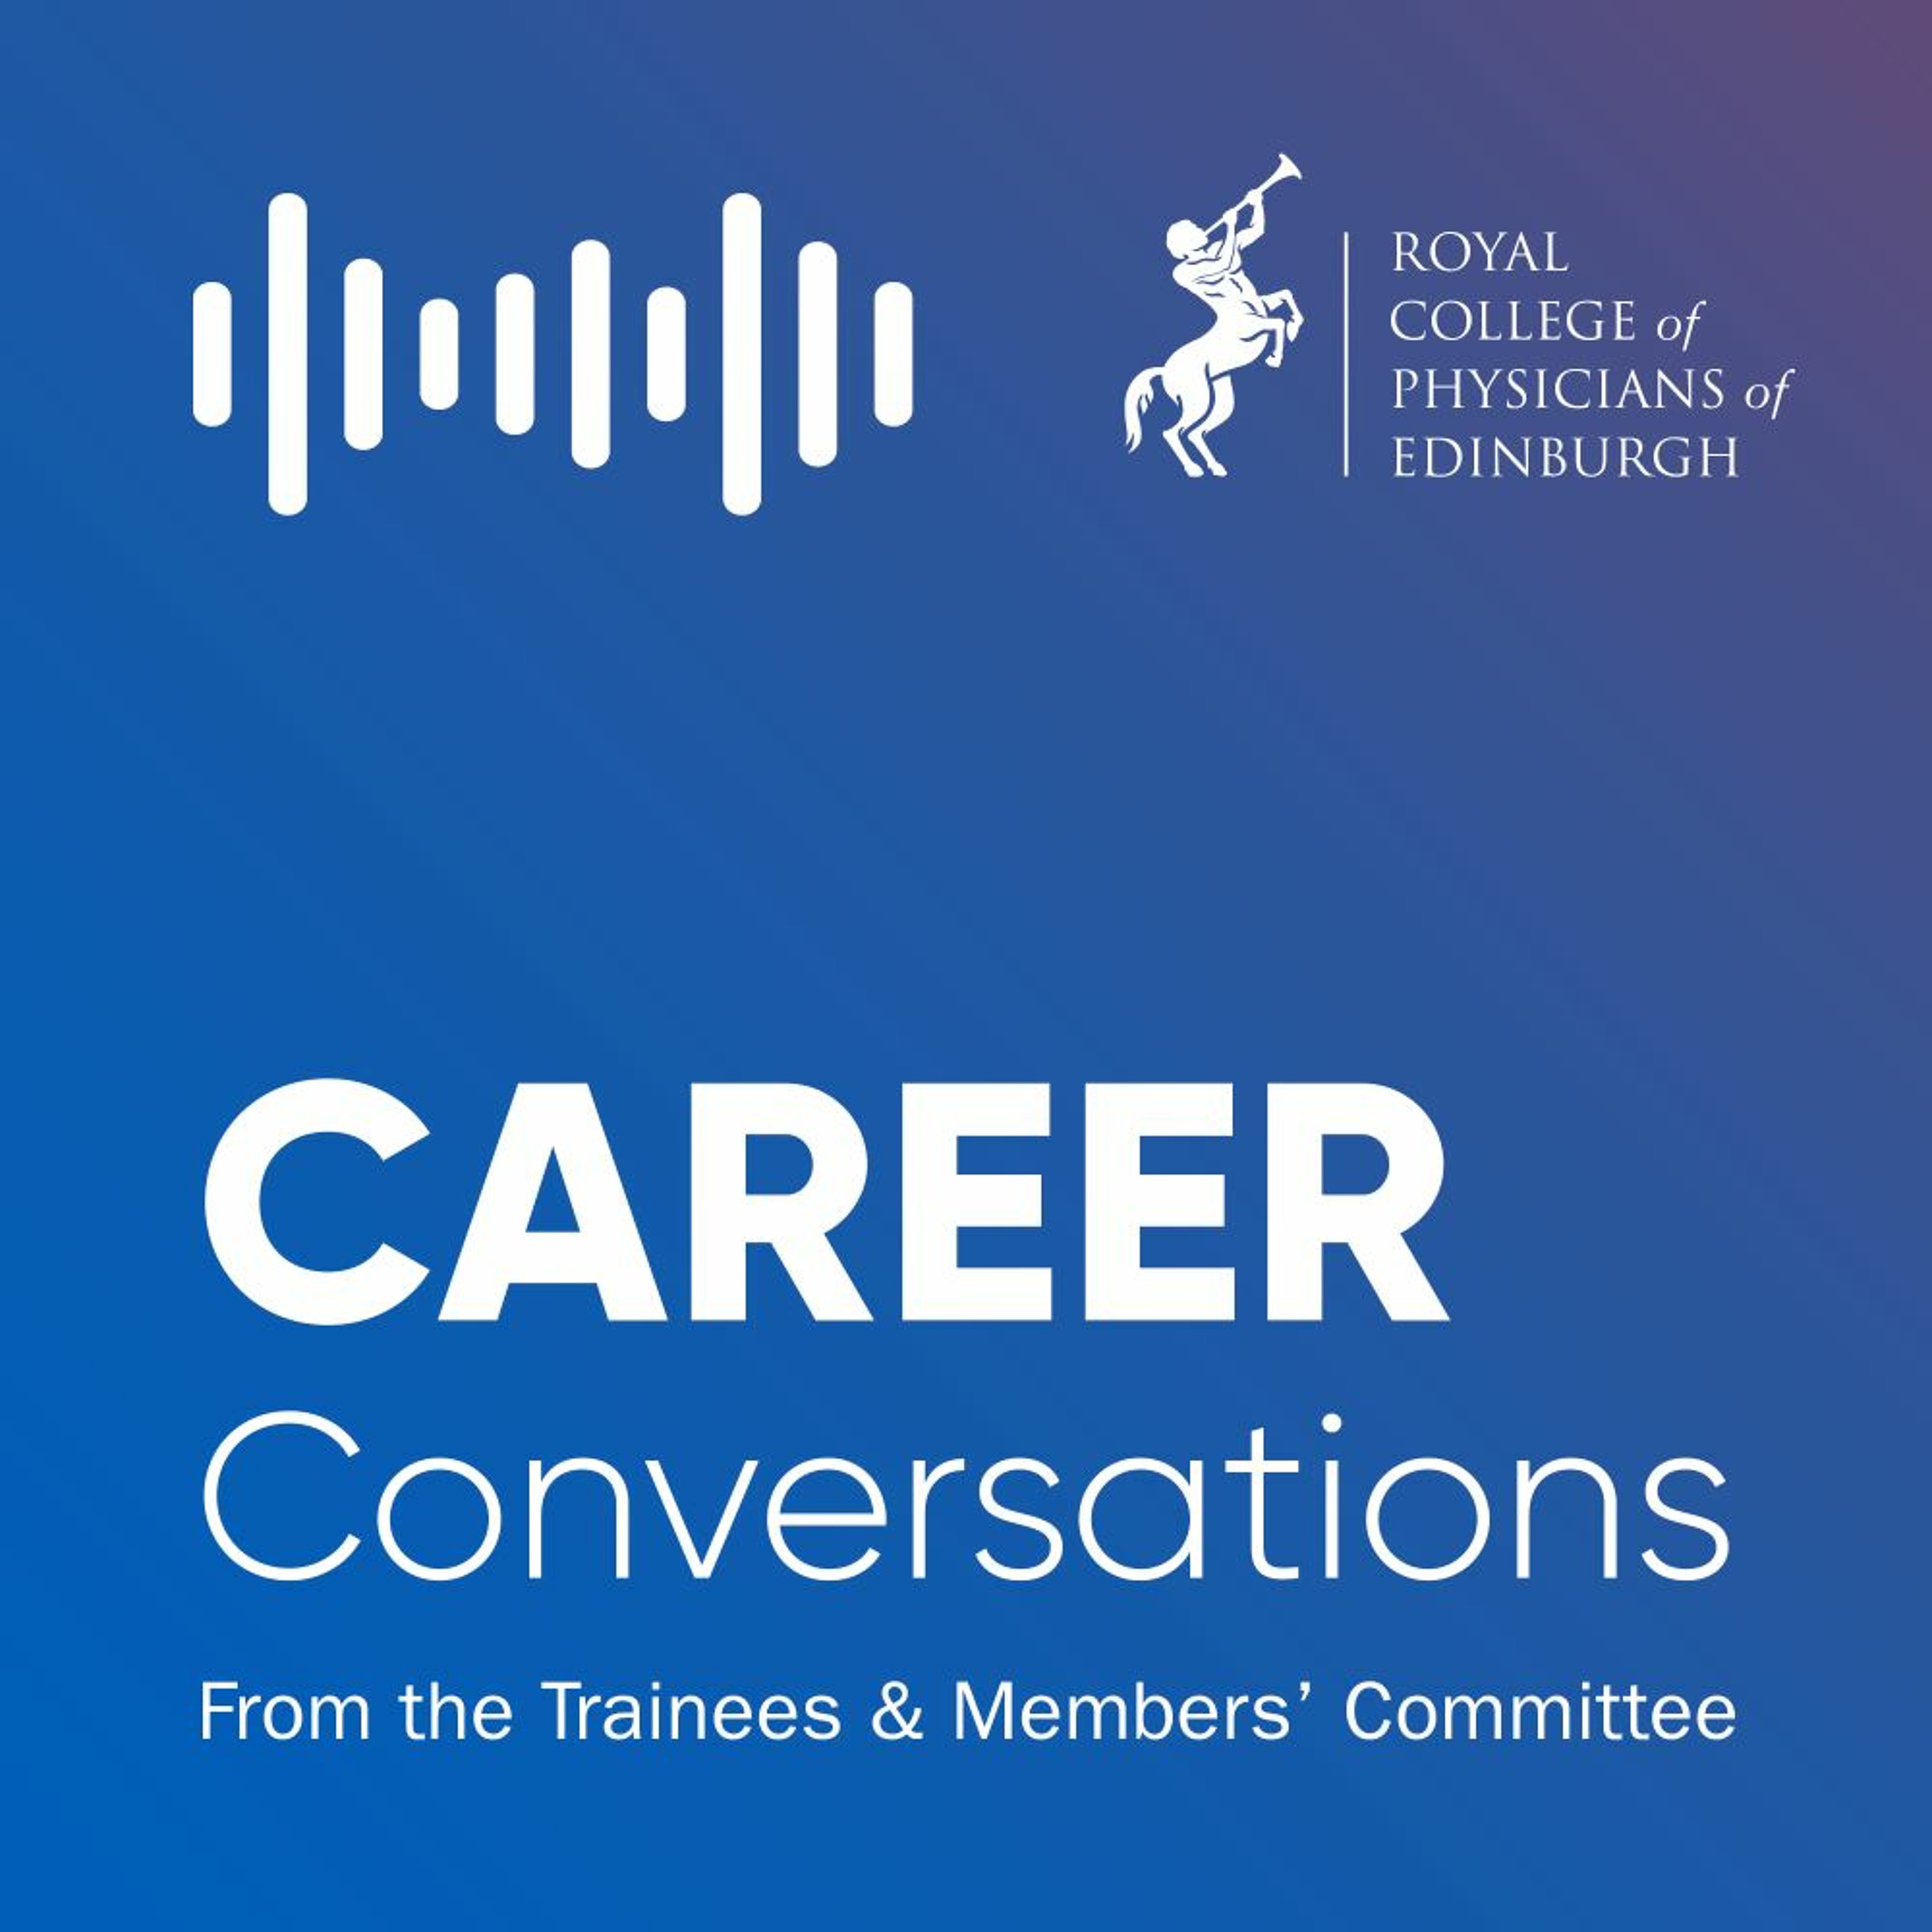 Interview themes and top tips for IMT (19 Jan 2023)